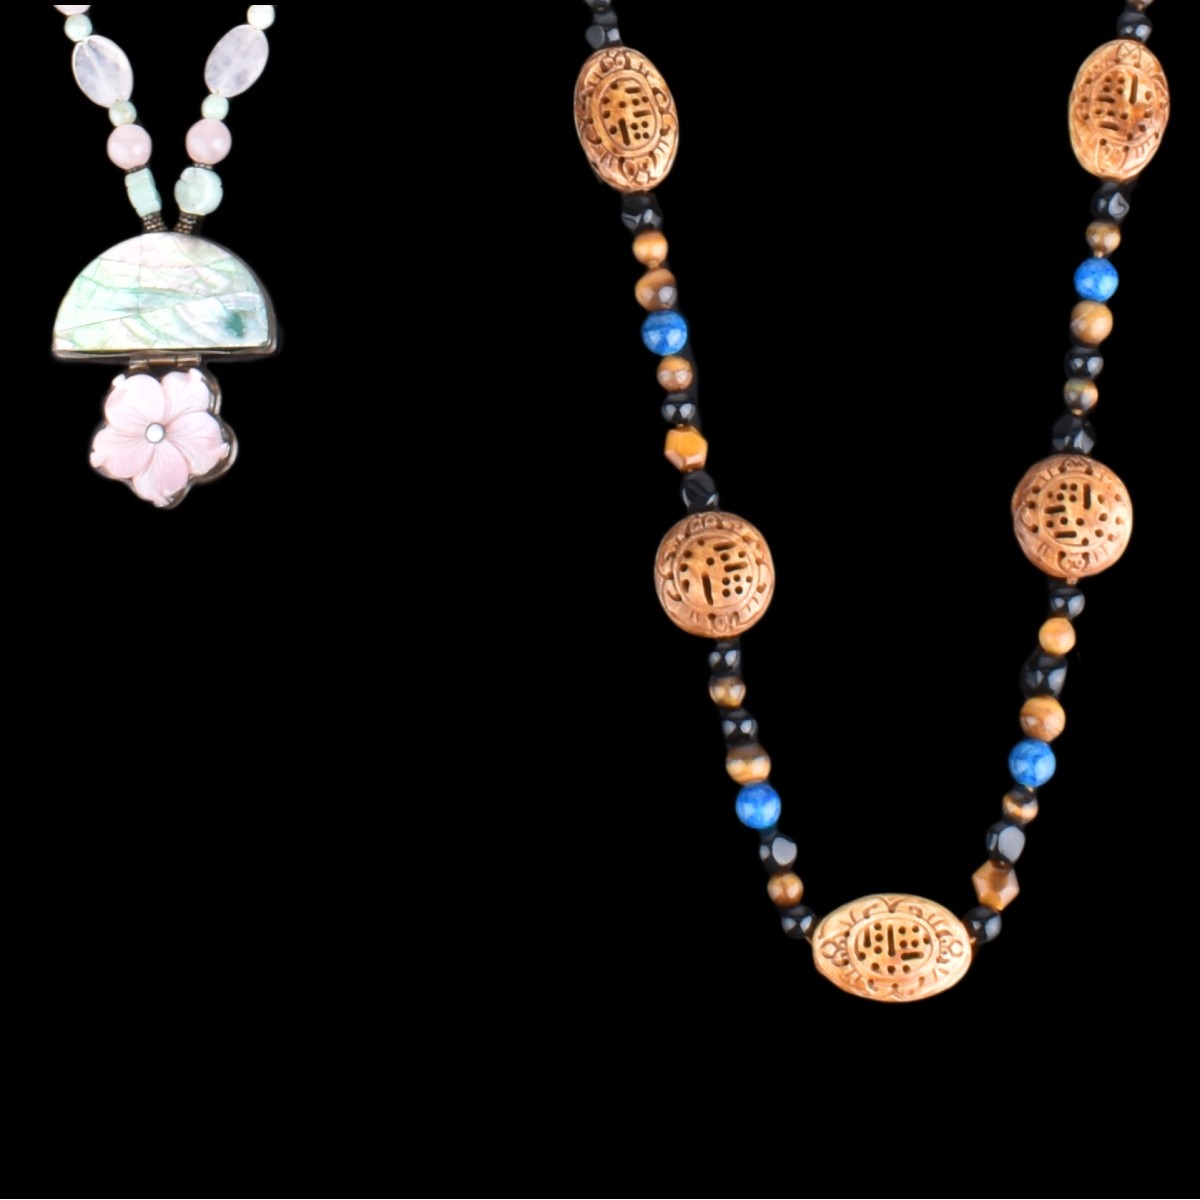 Grouping of Necklaces and Bracelet